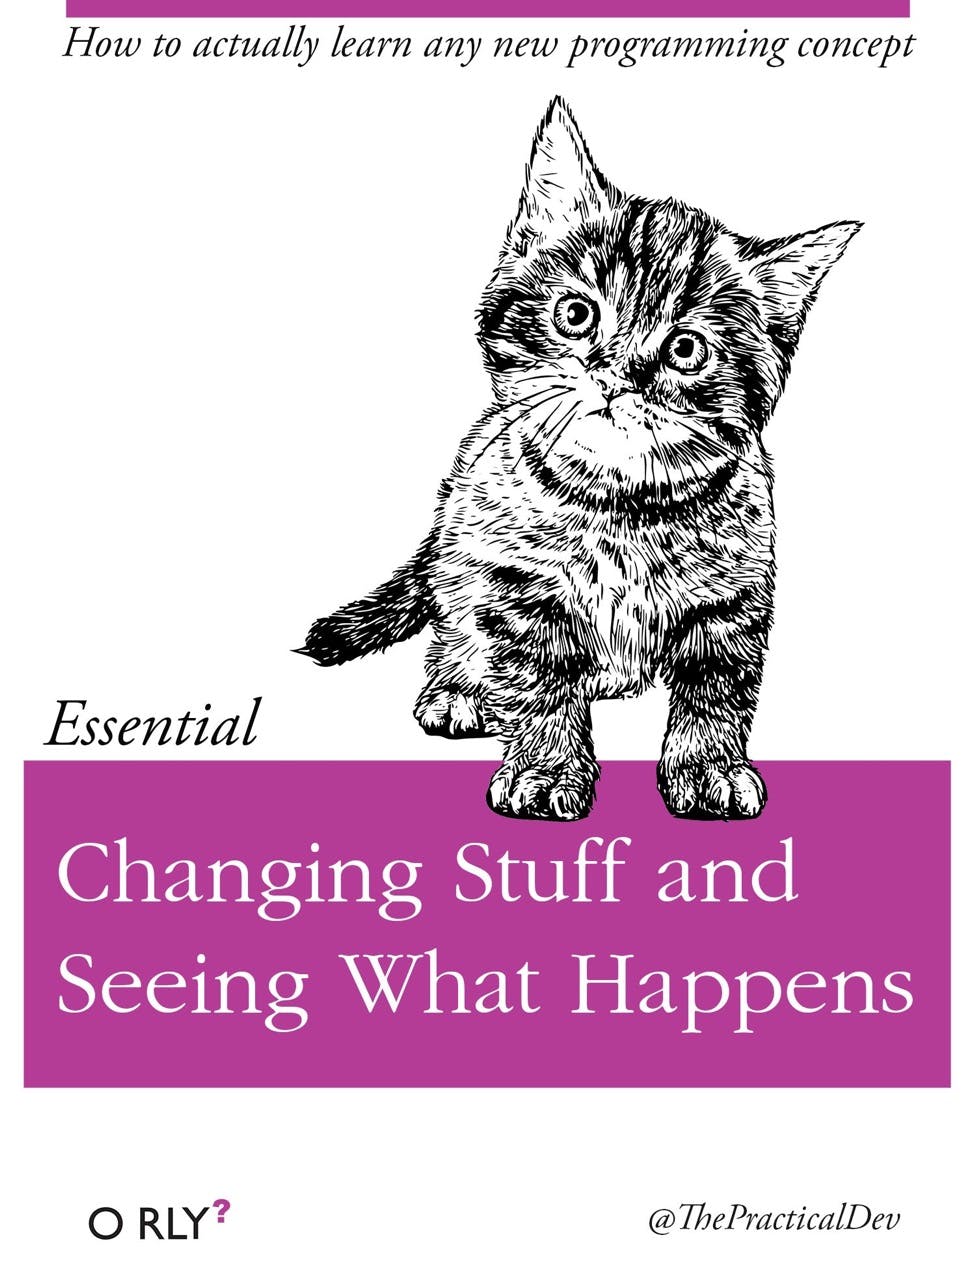 Changing Stuff and Seeing What Happens | How to actually learn any new programming concept